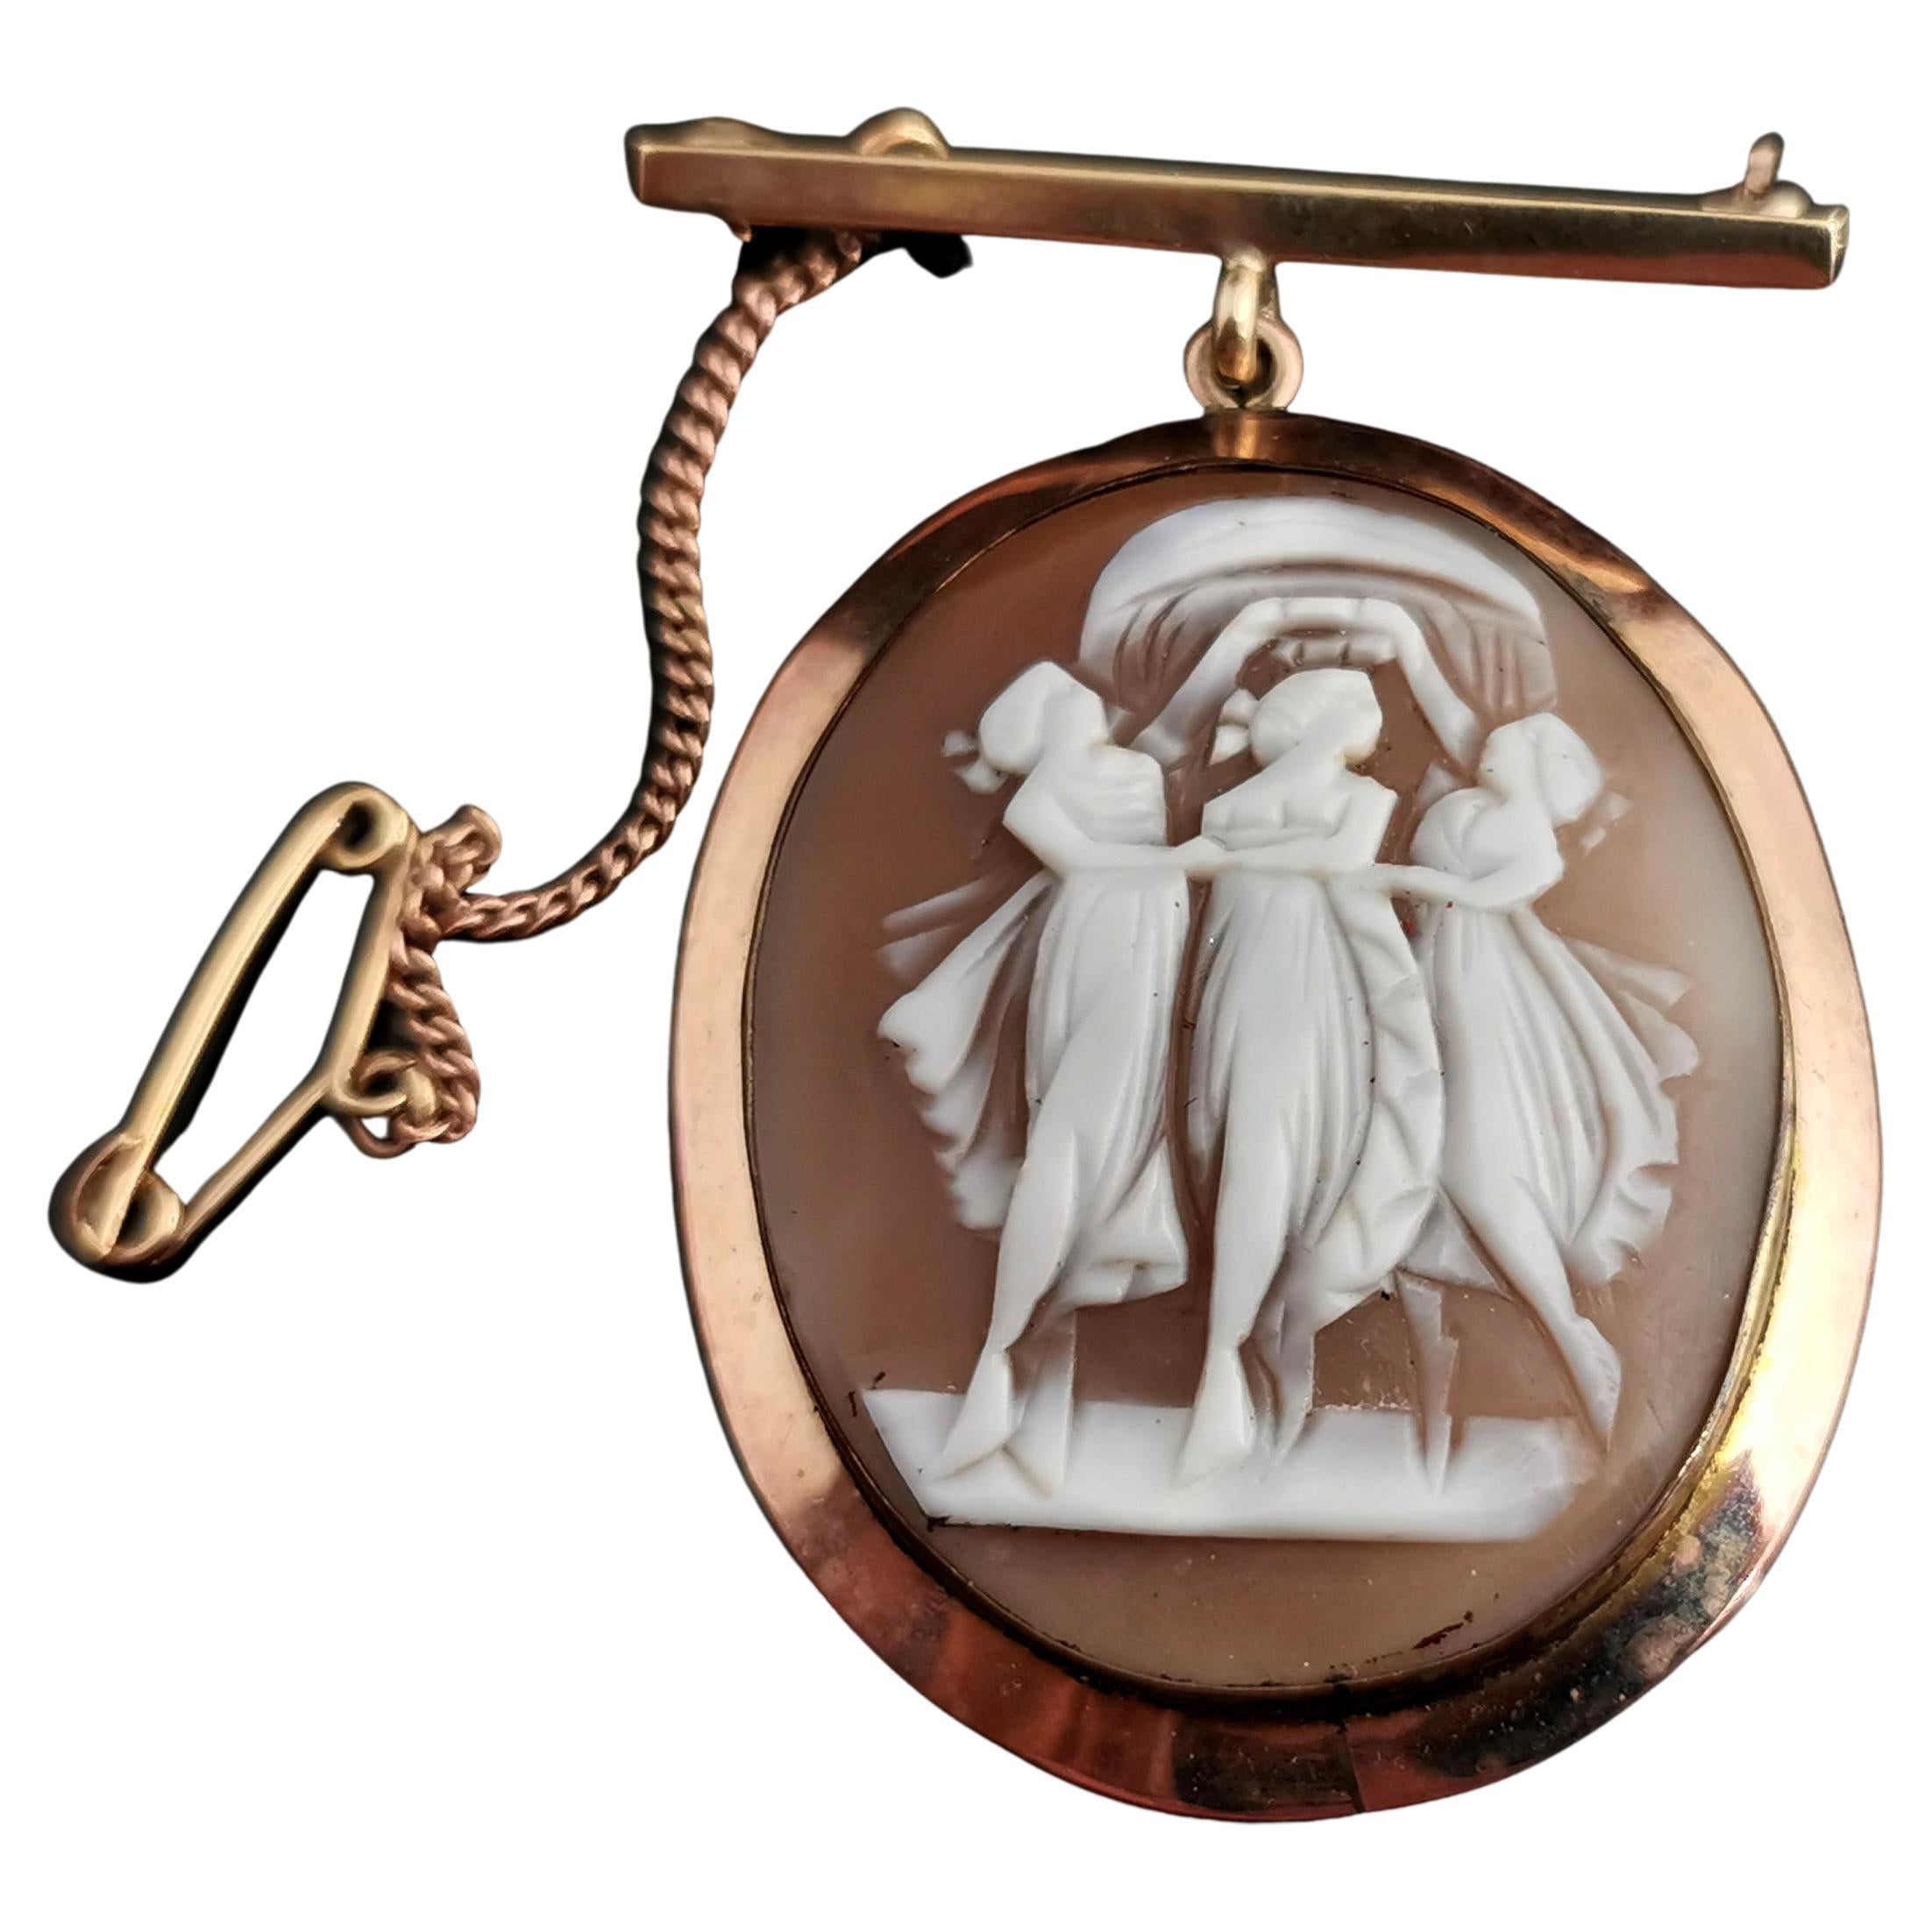 An attractive antique Edwardian era 9kt gold cameo pendant brooch.

A carved bullmou shell cameo depicting the three graces housed in a 9kt yellow gold frame, to the reverse there is a glazed compartment which currently holds an old photograph.

The